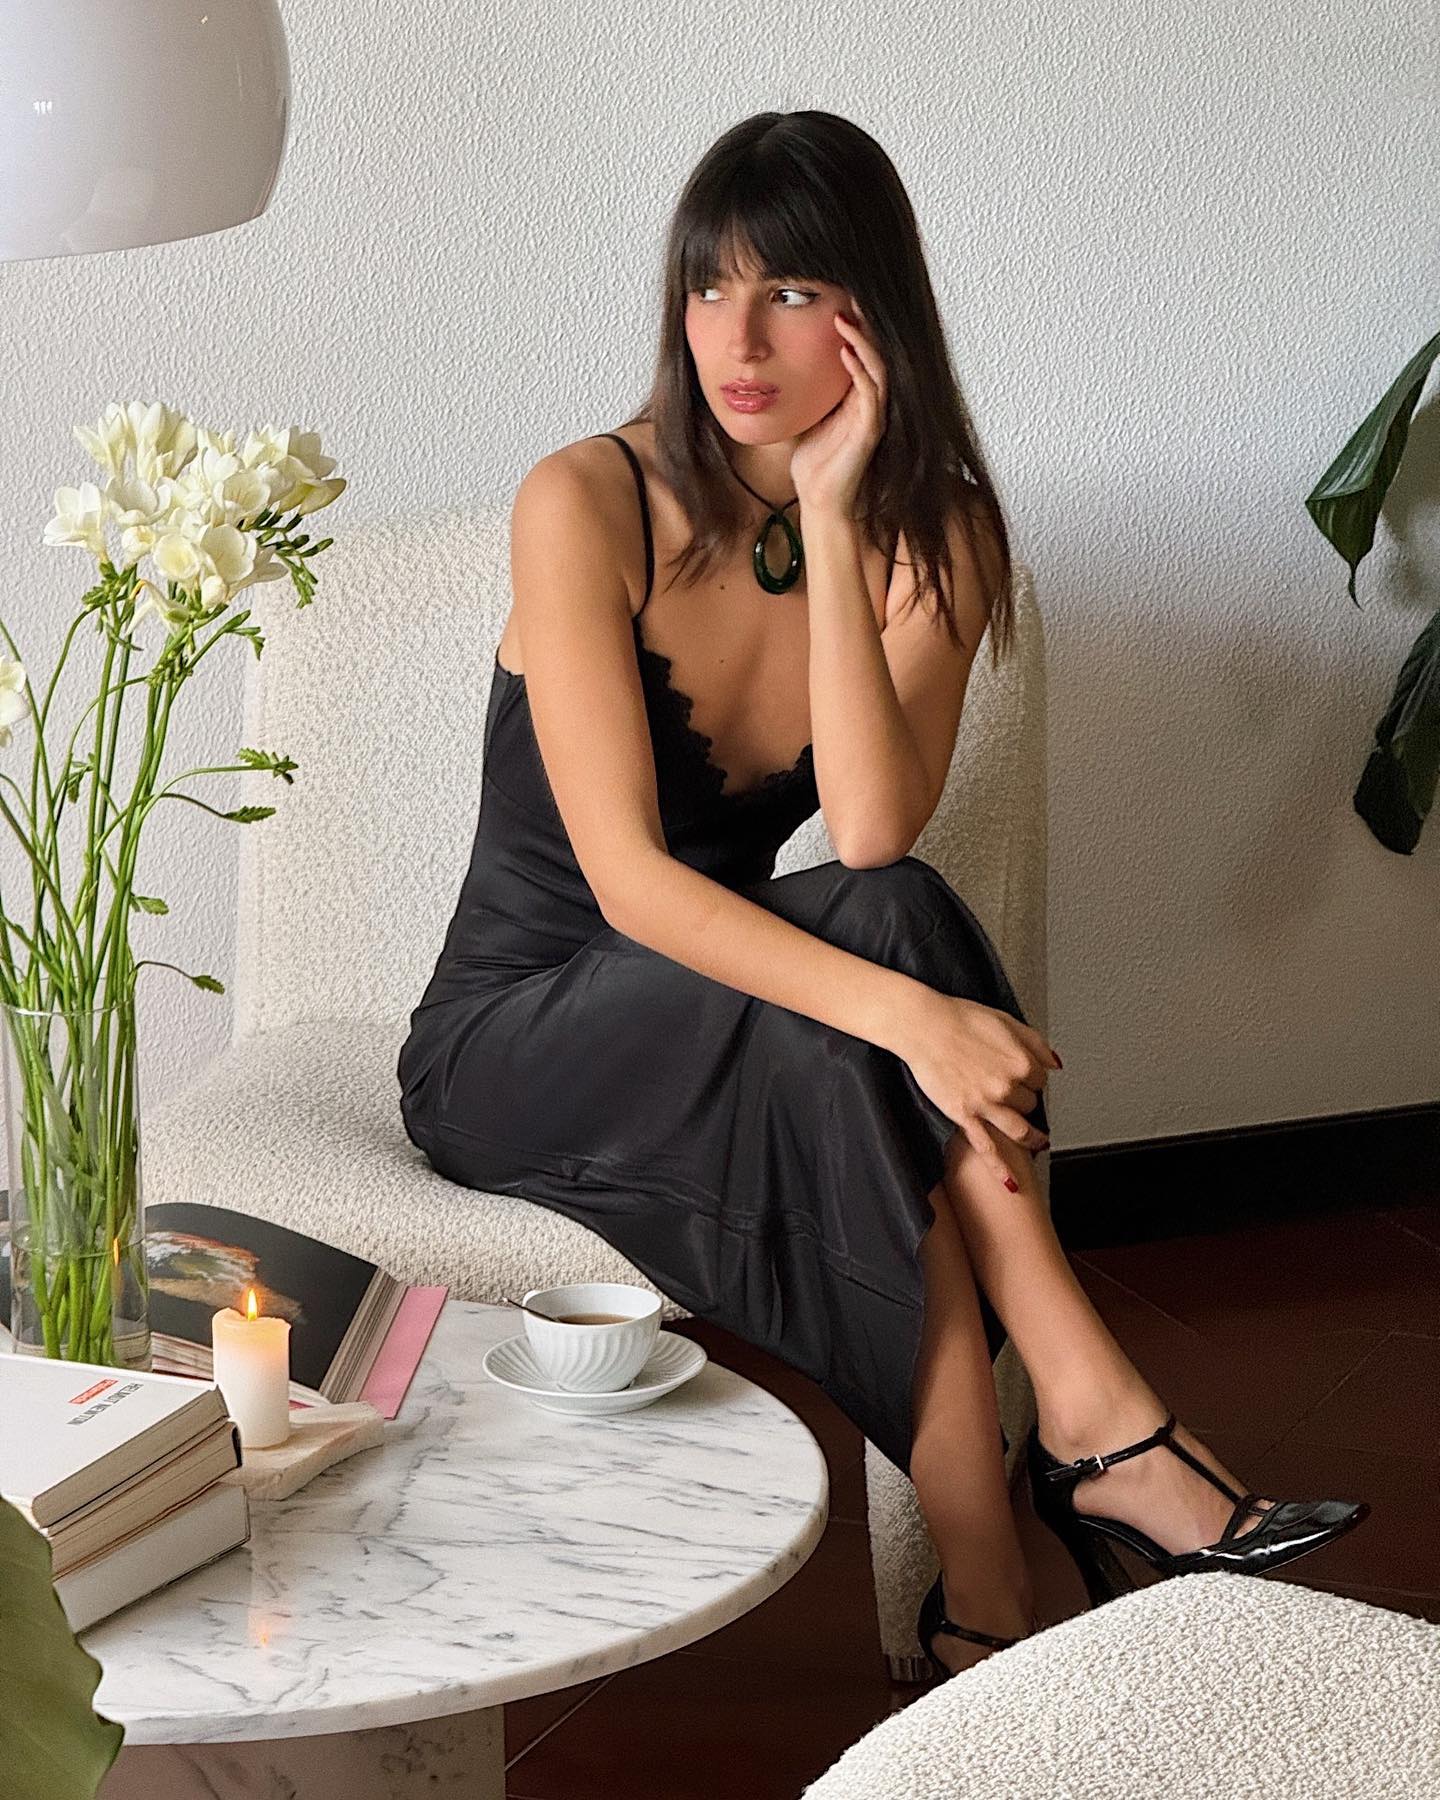 French woman wearing a black slip dress with patent leather shoes.